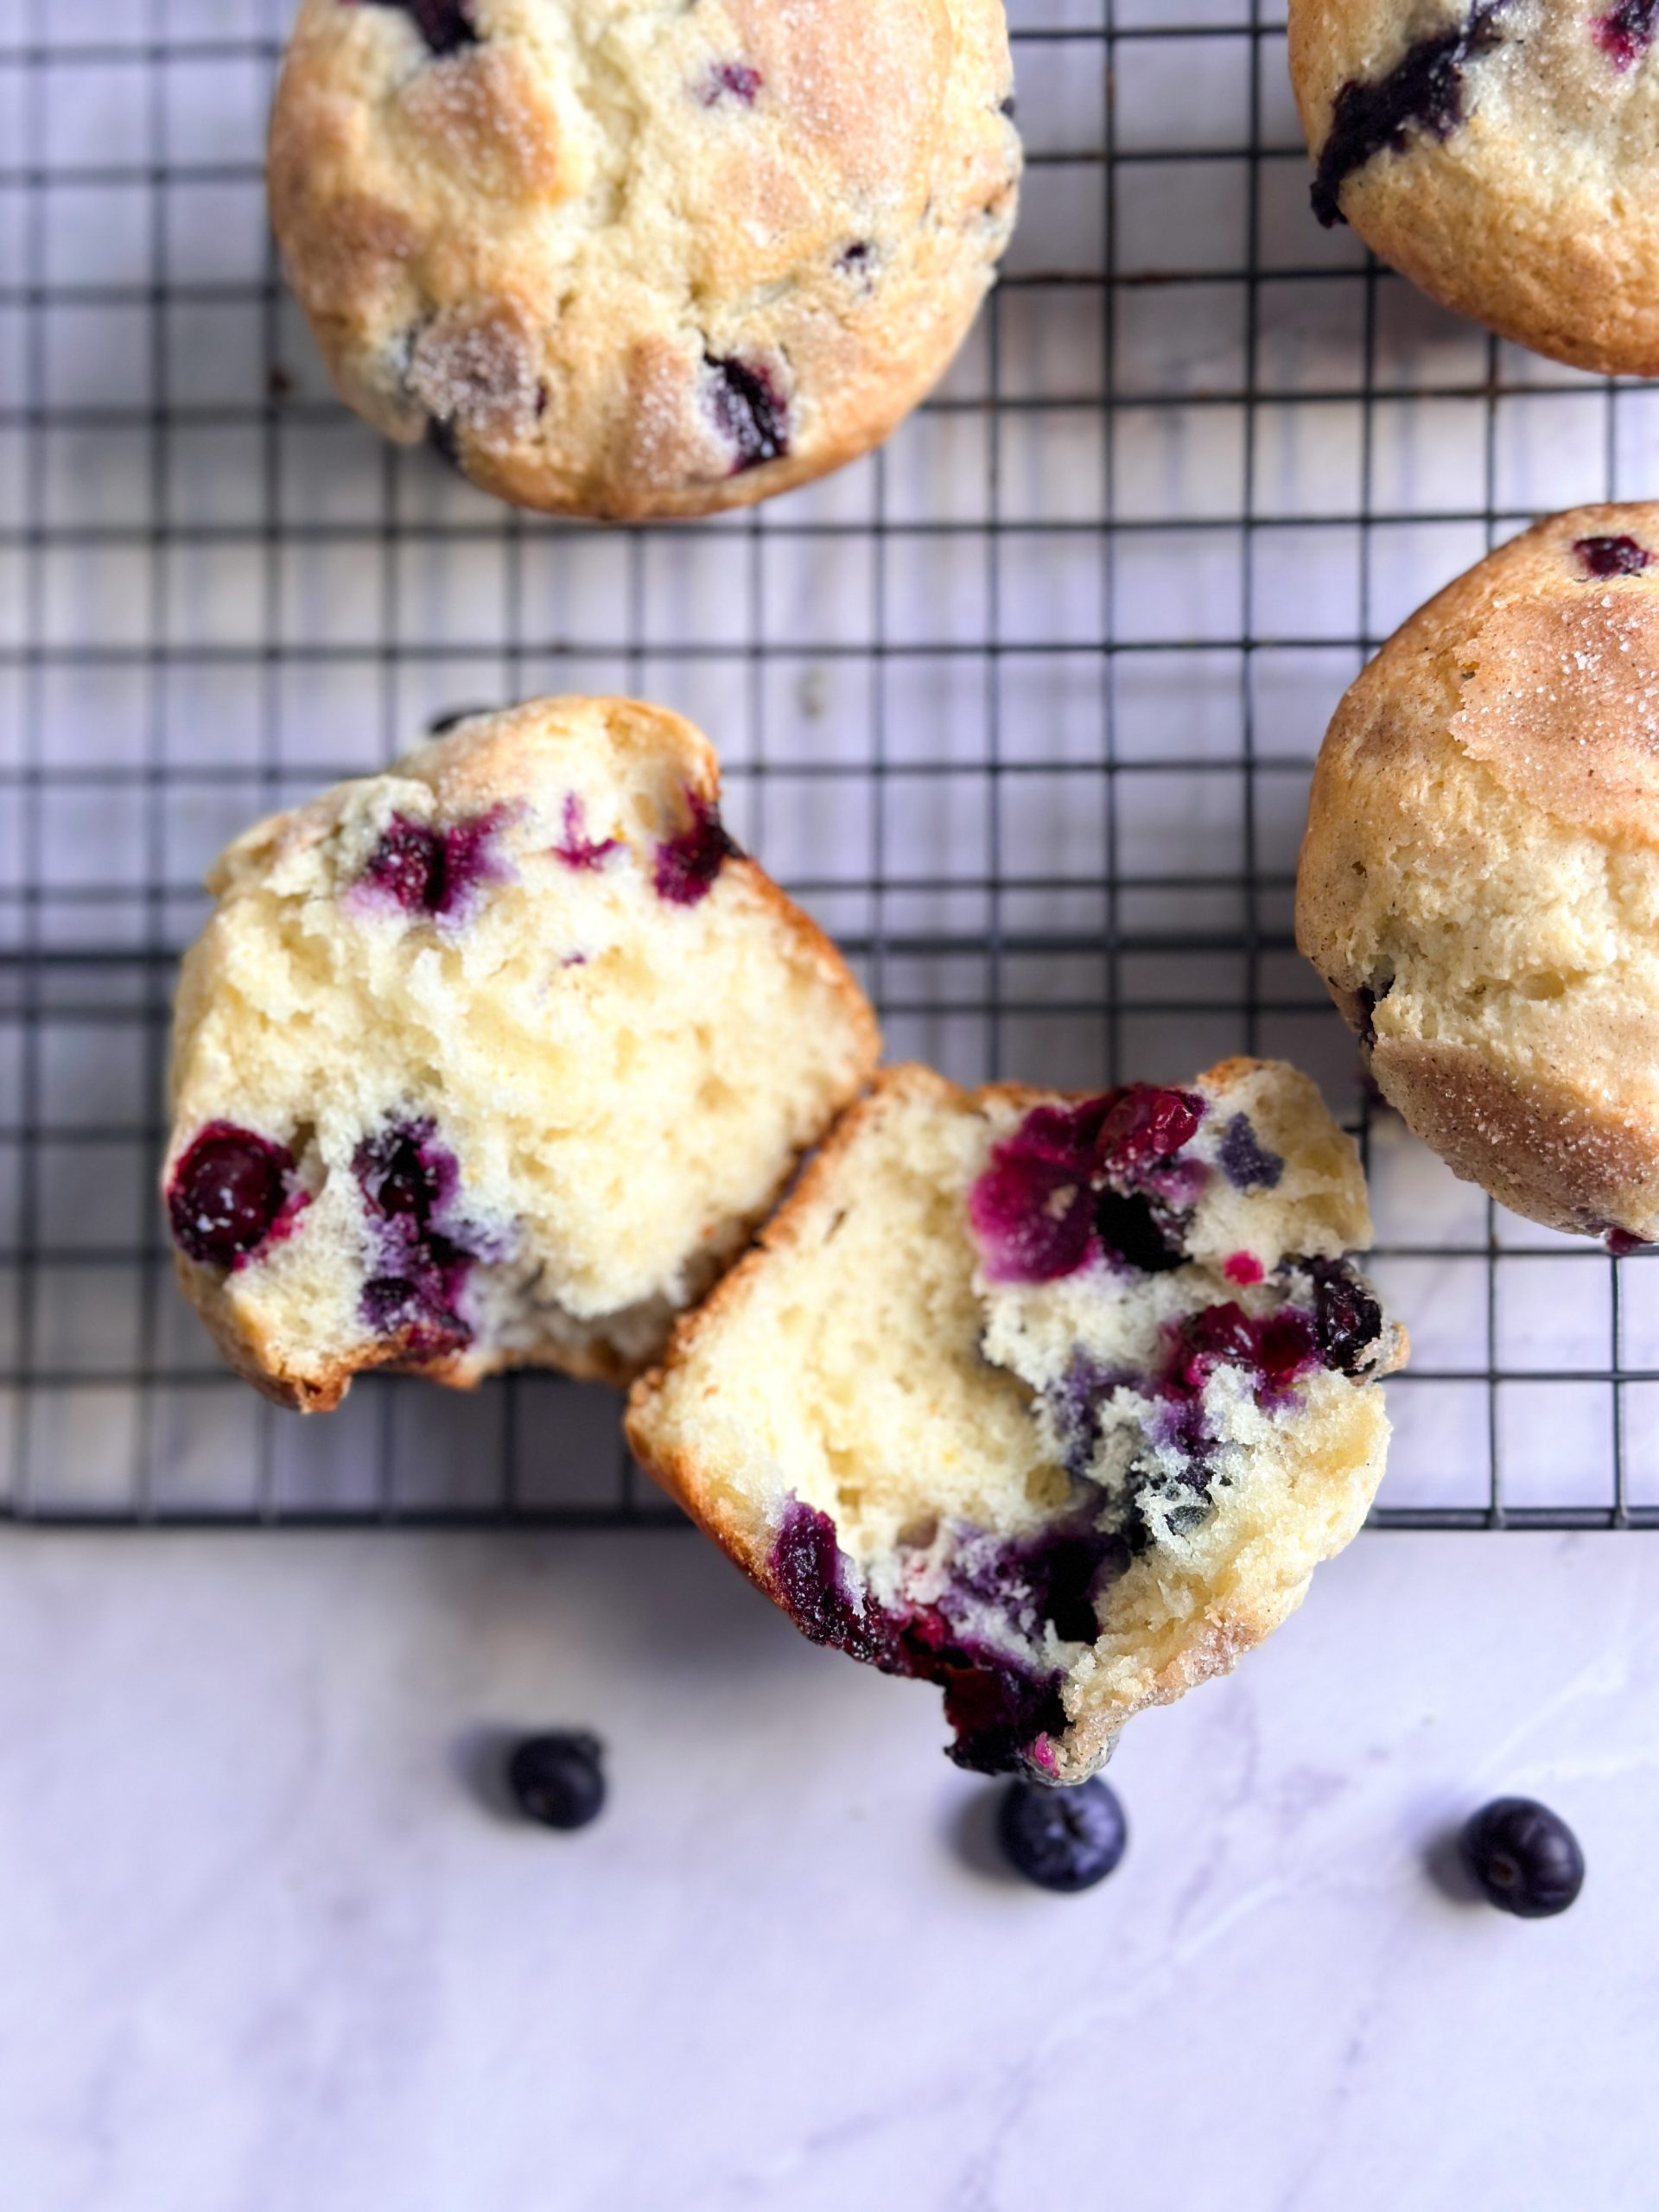 Close up of a lemon blueberry muffin sliced into 2 halves revealing soft fluffy interior with bursting blueberries